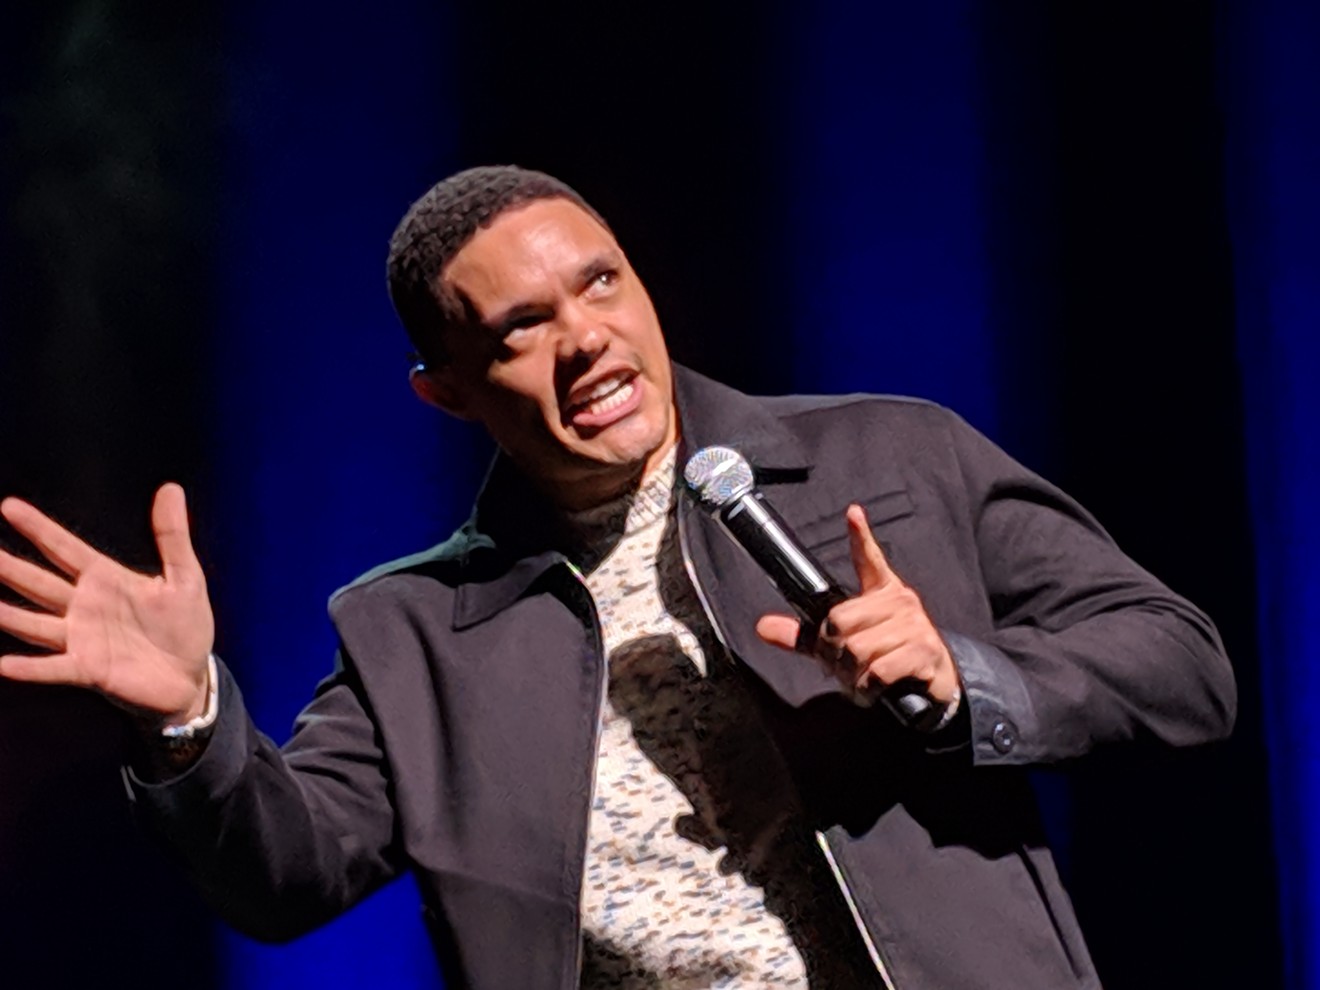 Comedy Central's The Daily Show host and best-selling author Trevor Noah visits Las Colinas this Friday.